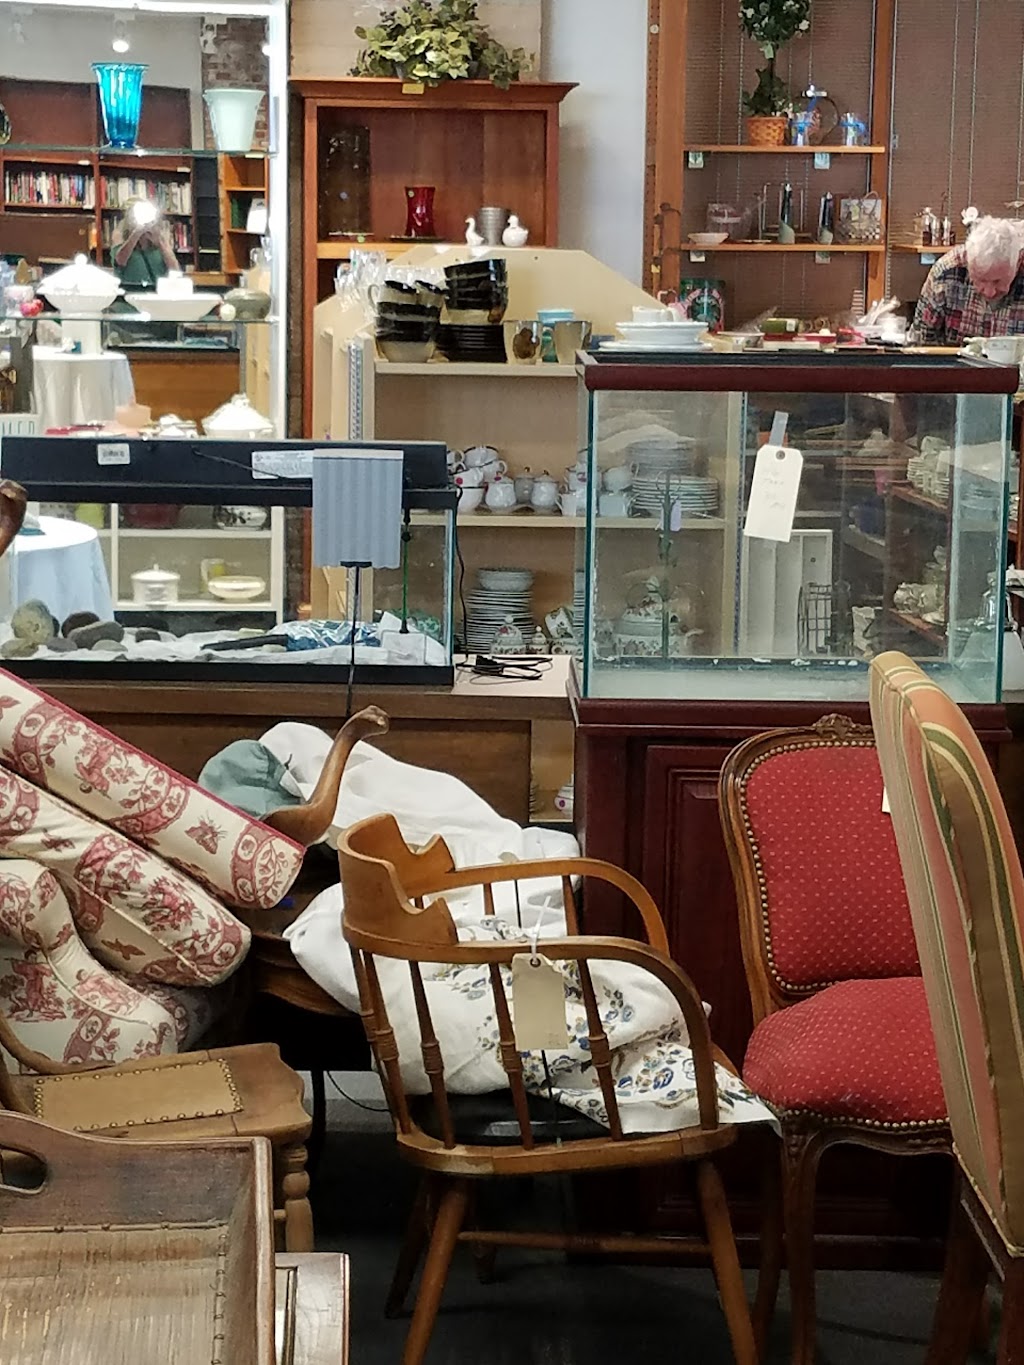 Greenwich Hospital Auxiliary Thrift Shop | 199 Hamilton Ave, Greenwich, CT 06830 | Phone: (203) 863-3933